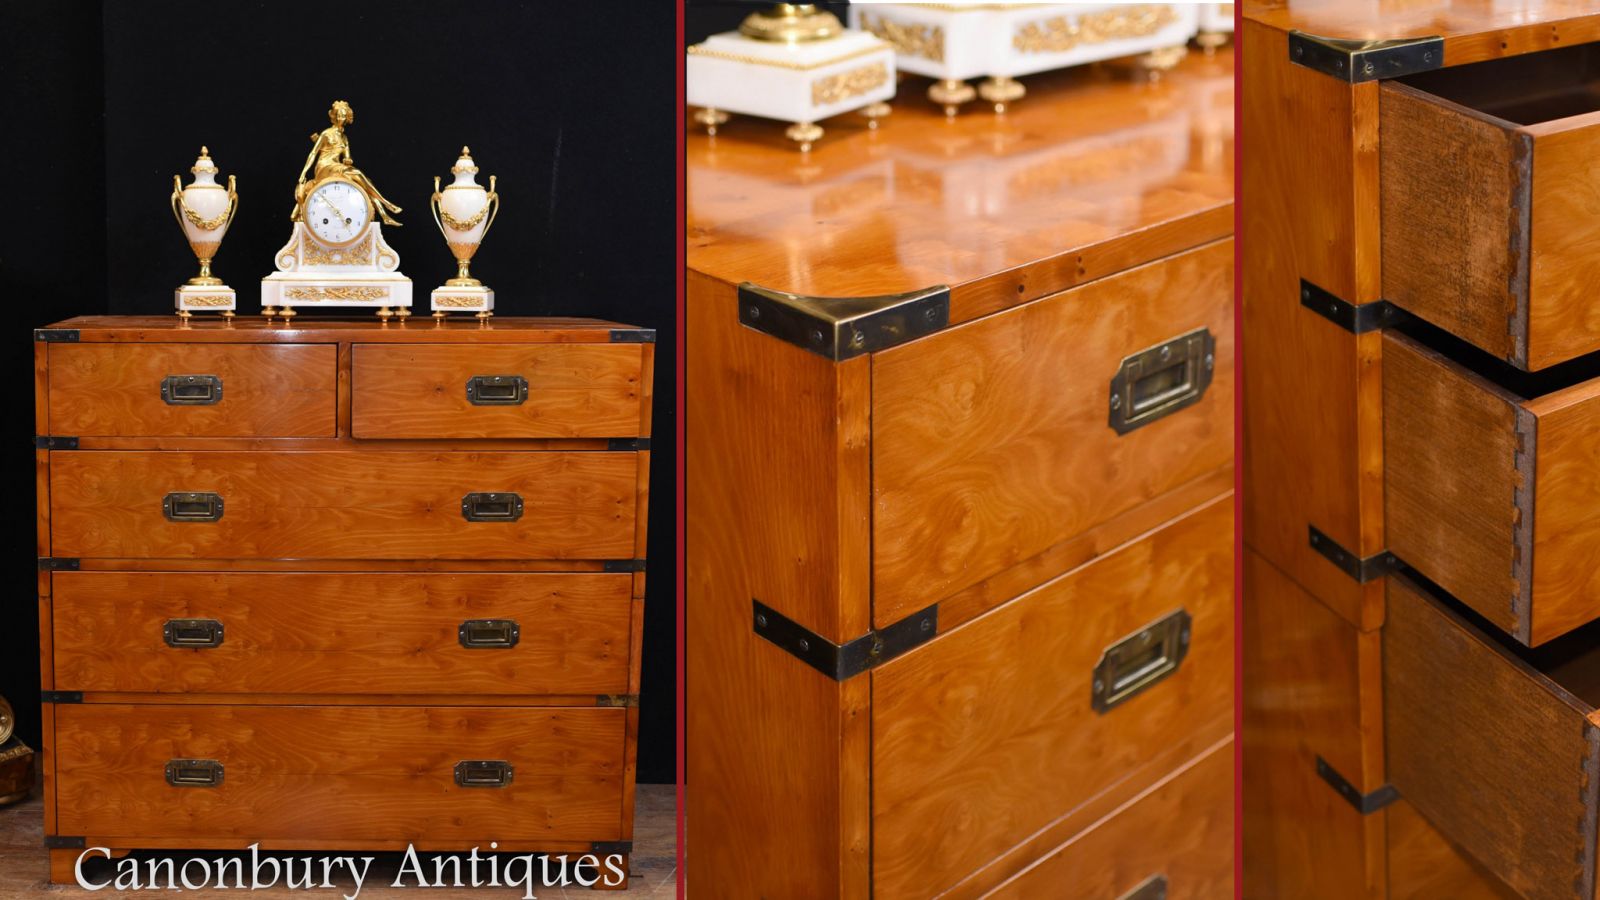 Walnut Campaign Chest of Drawers - Colonial Commode